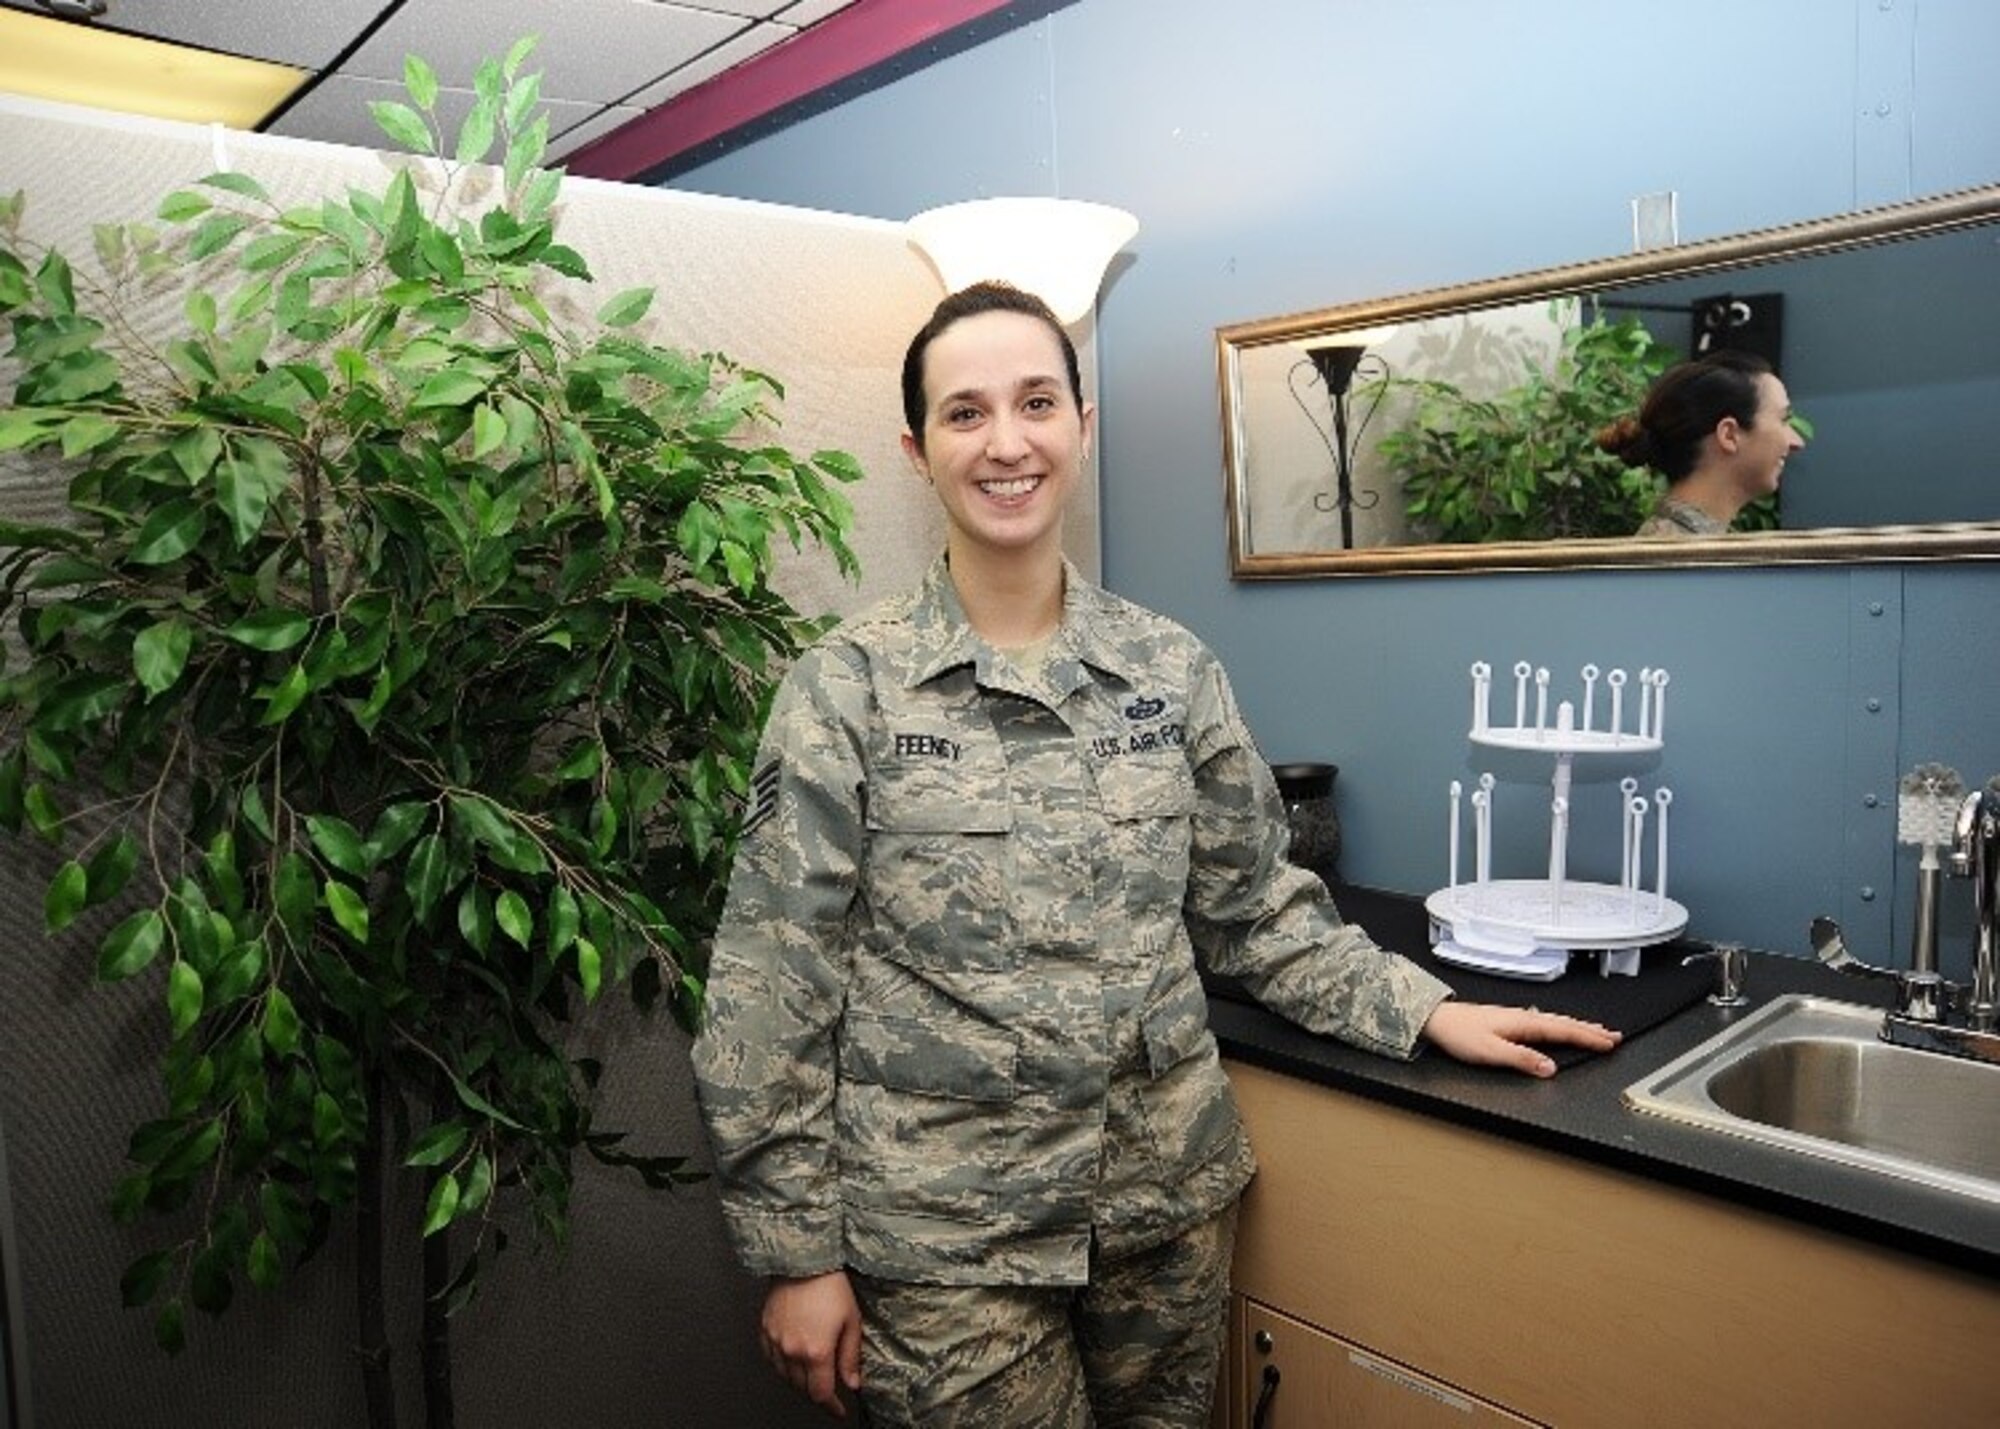 Staff Sgt. Trisha Feeney, 20th Intelligence Squadron, poses for photo March 12, 2019 in the squadron’s new lactation room on Offutt Air Force Base, Nebraska. Feeney established and designed the room to give lactating mom’s privacy as they pump breastmilk for their babies. (U.S. Air Force courtesy photo)